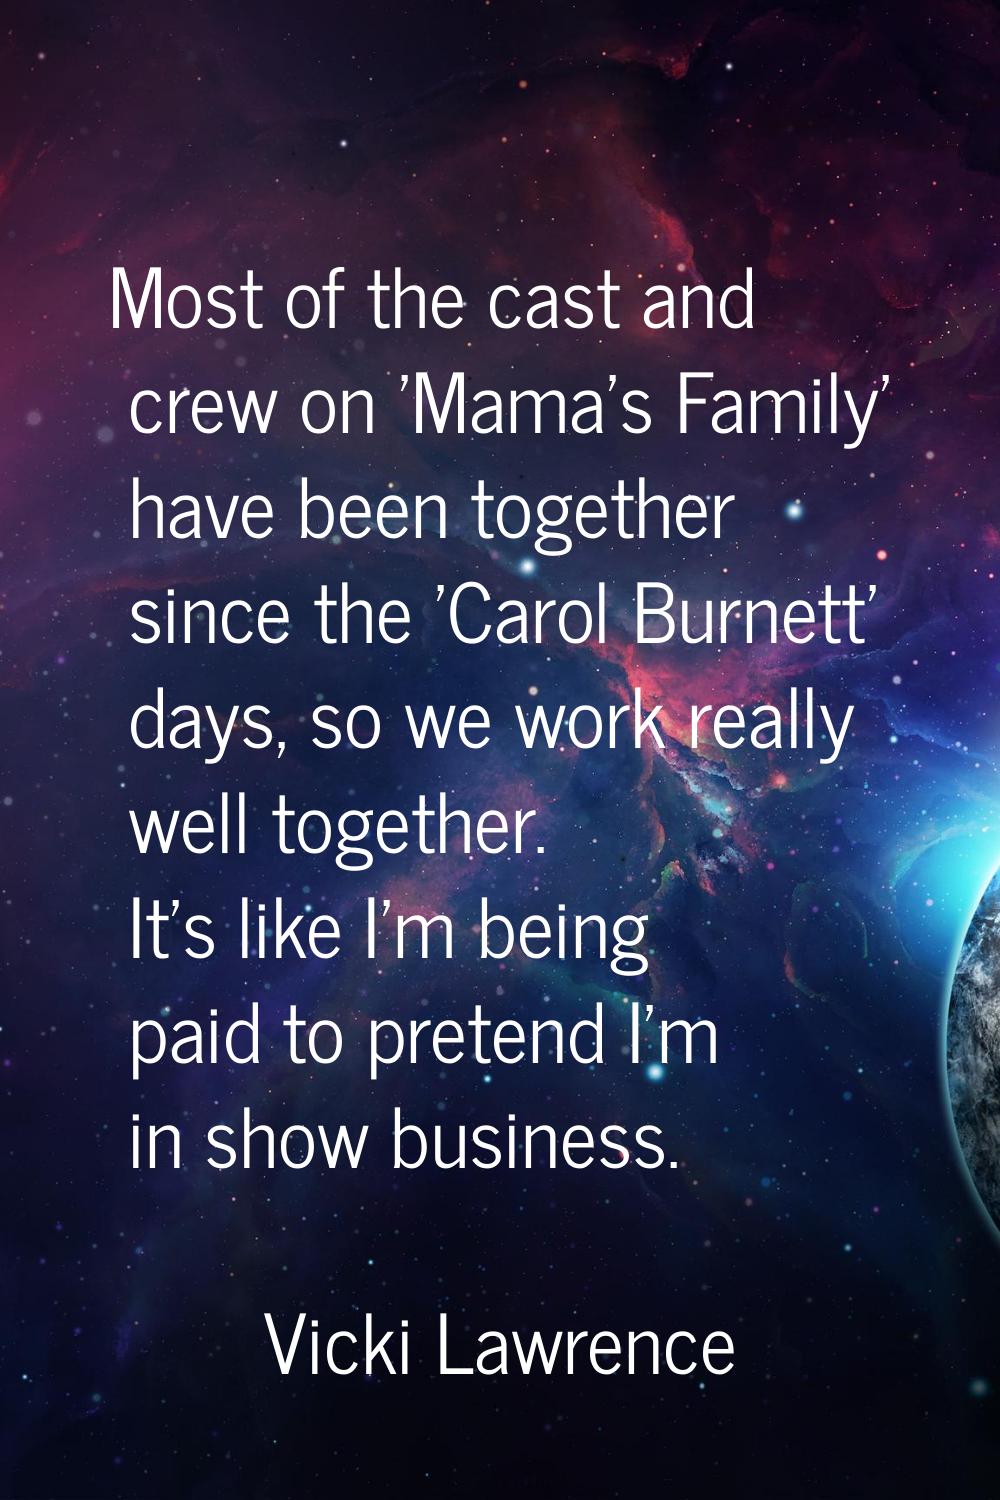 Most of the cast and crew on 'Mama's Family' have been together since the 'Carol Burnett' days, so 